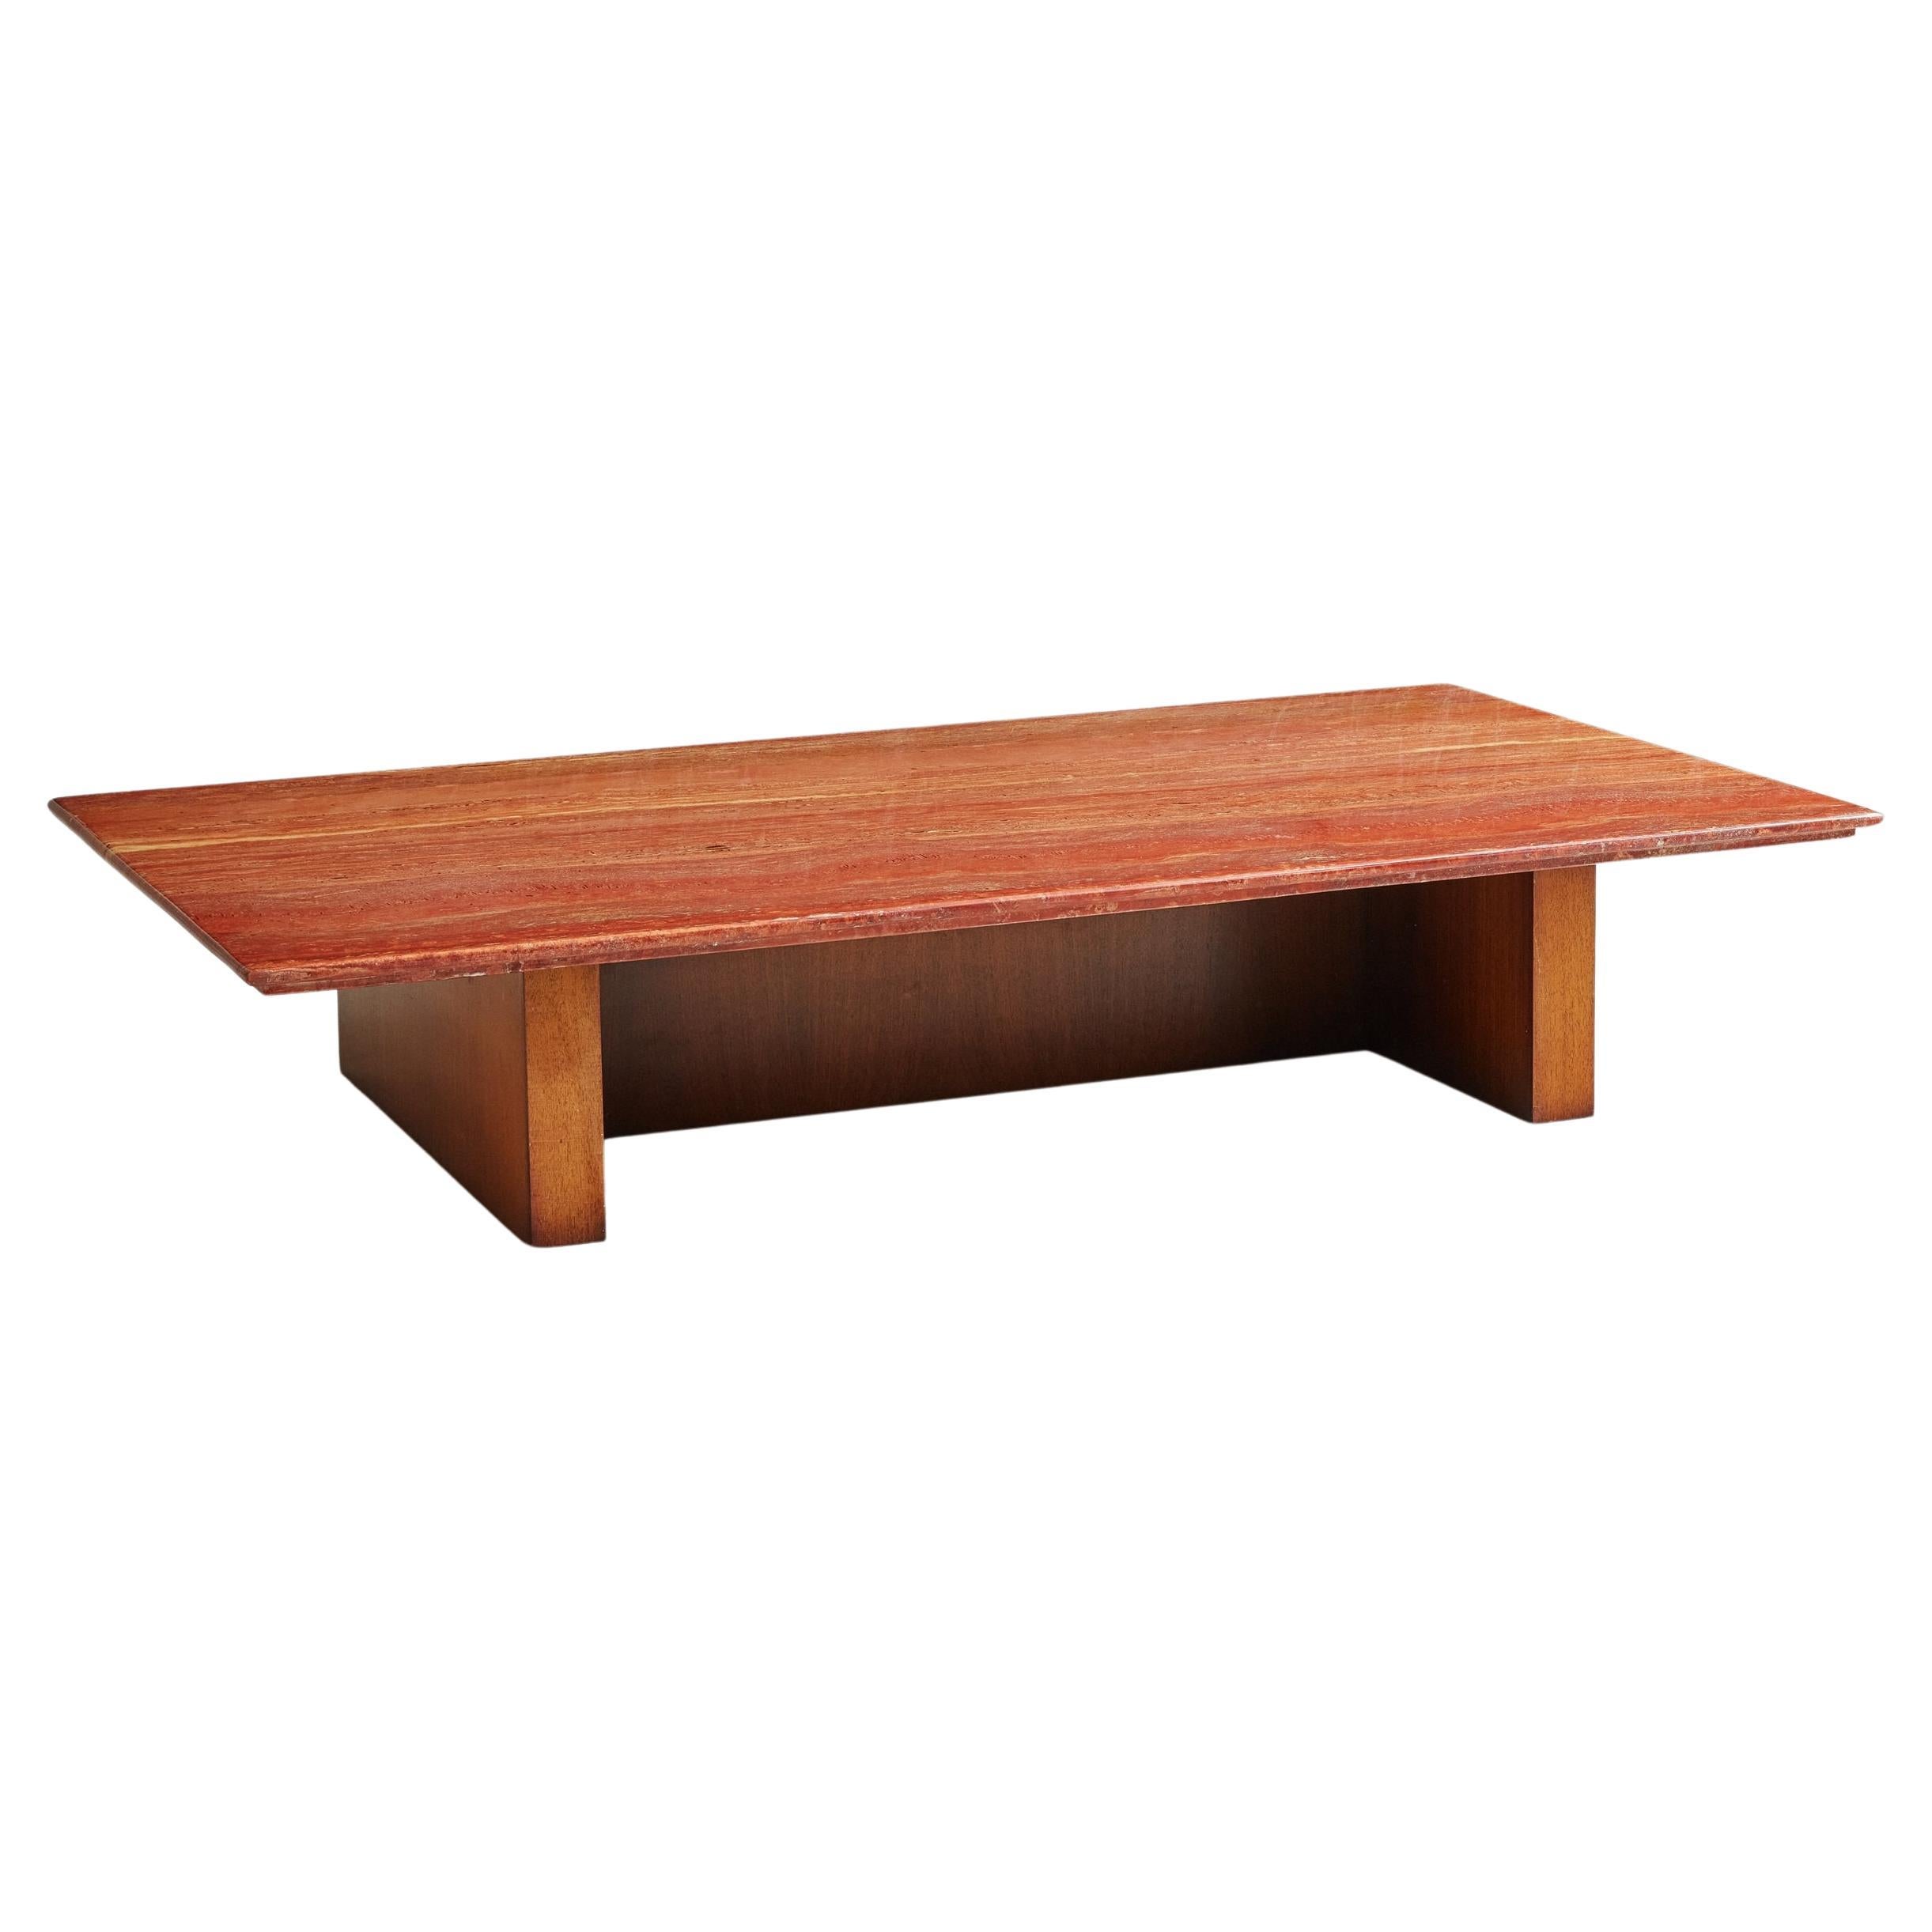 Modern Red Travertine Coffee Table with Wood Base, Belgium 1970s